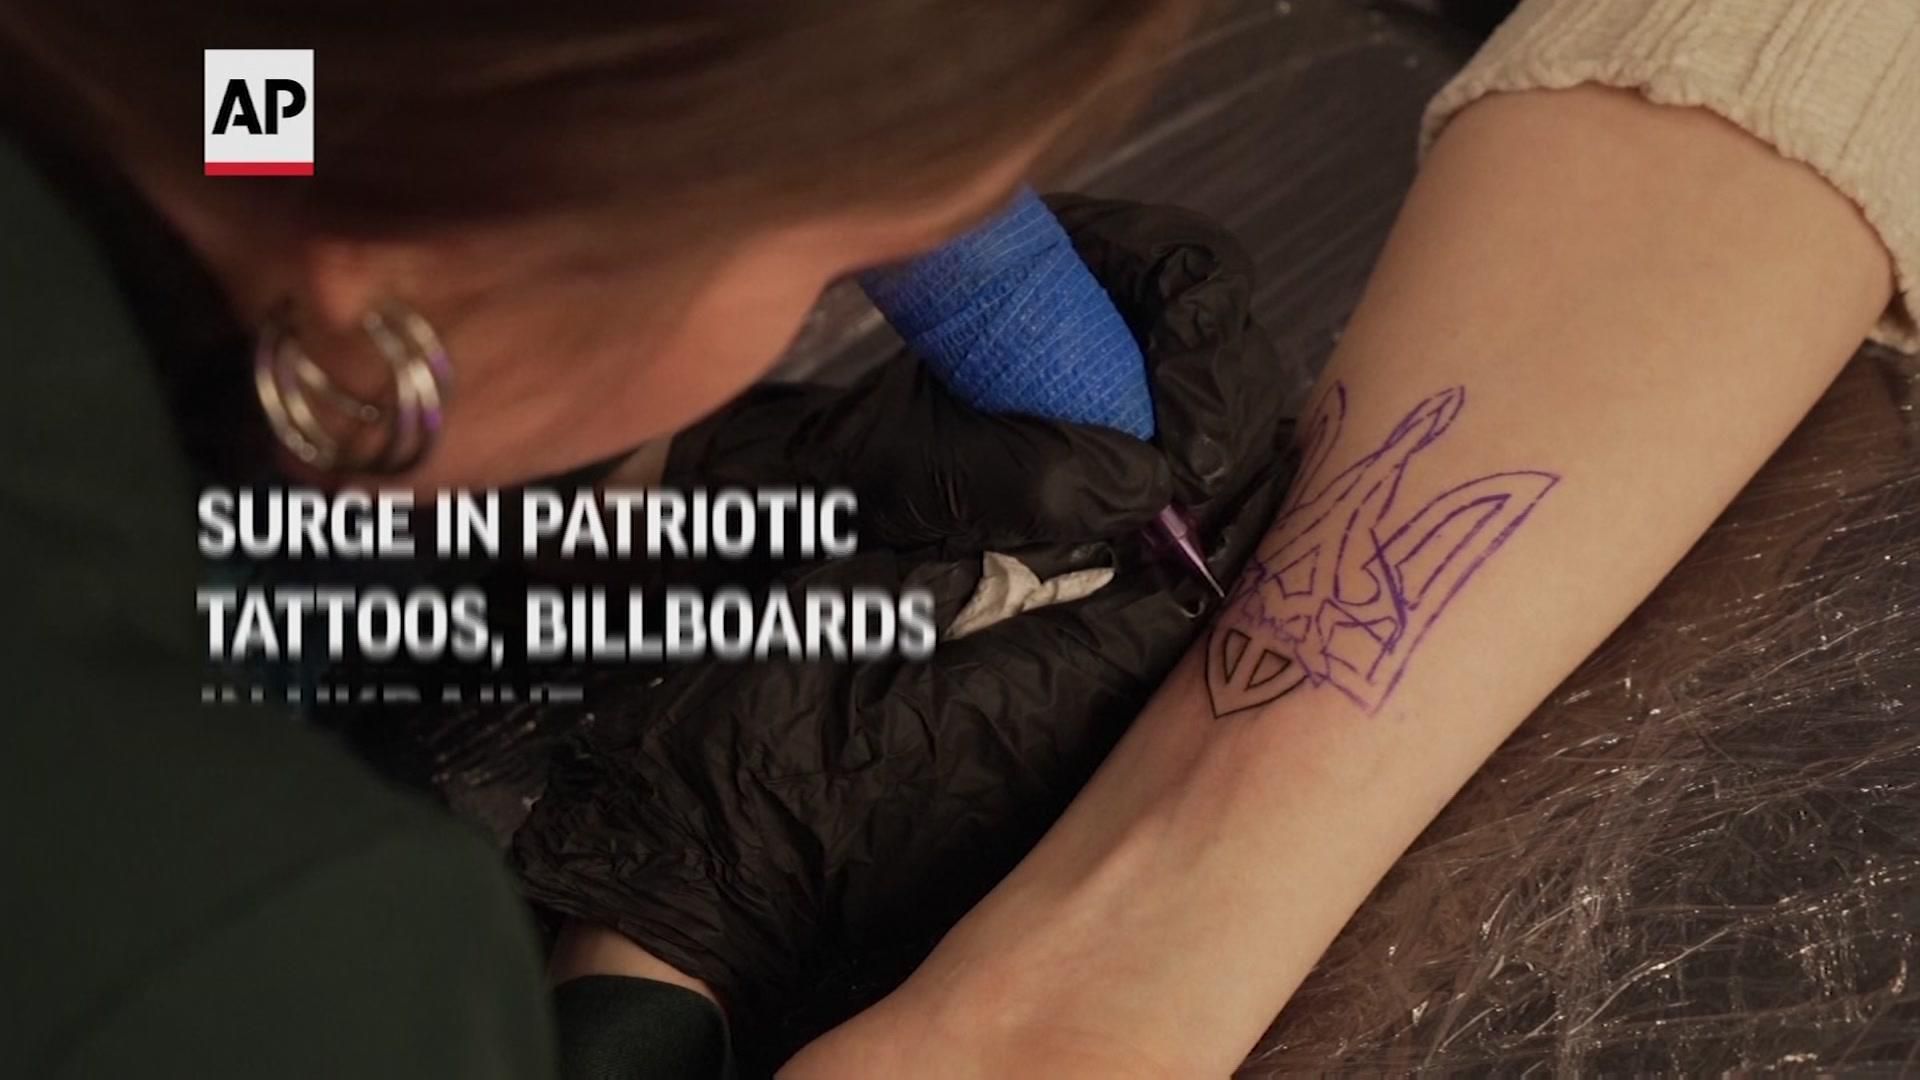 Tattooed Russia: A declaration of love captured on the body - Russia Beyond